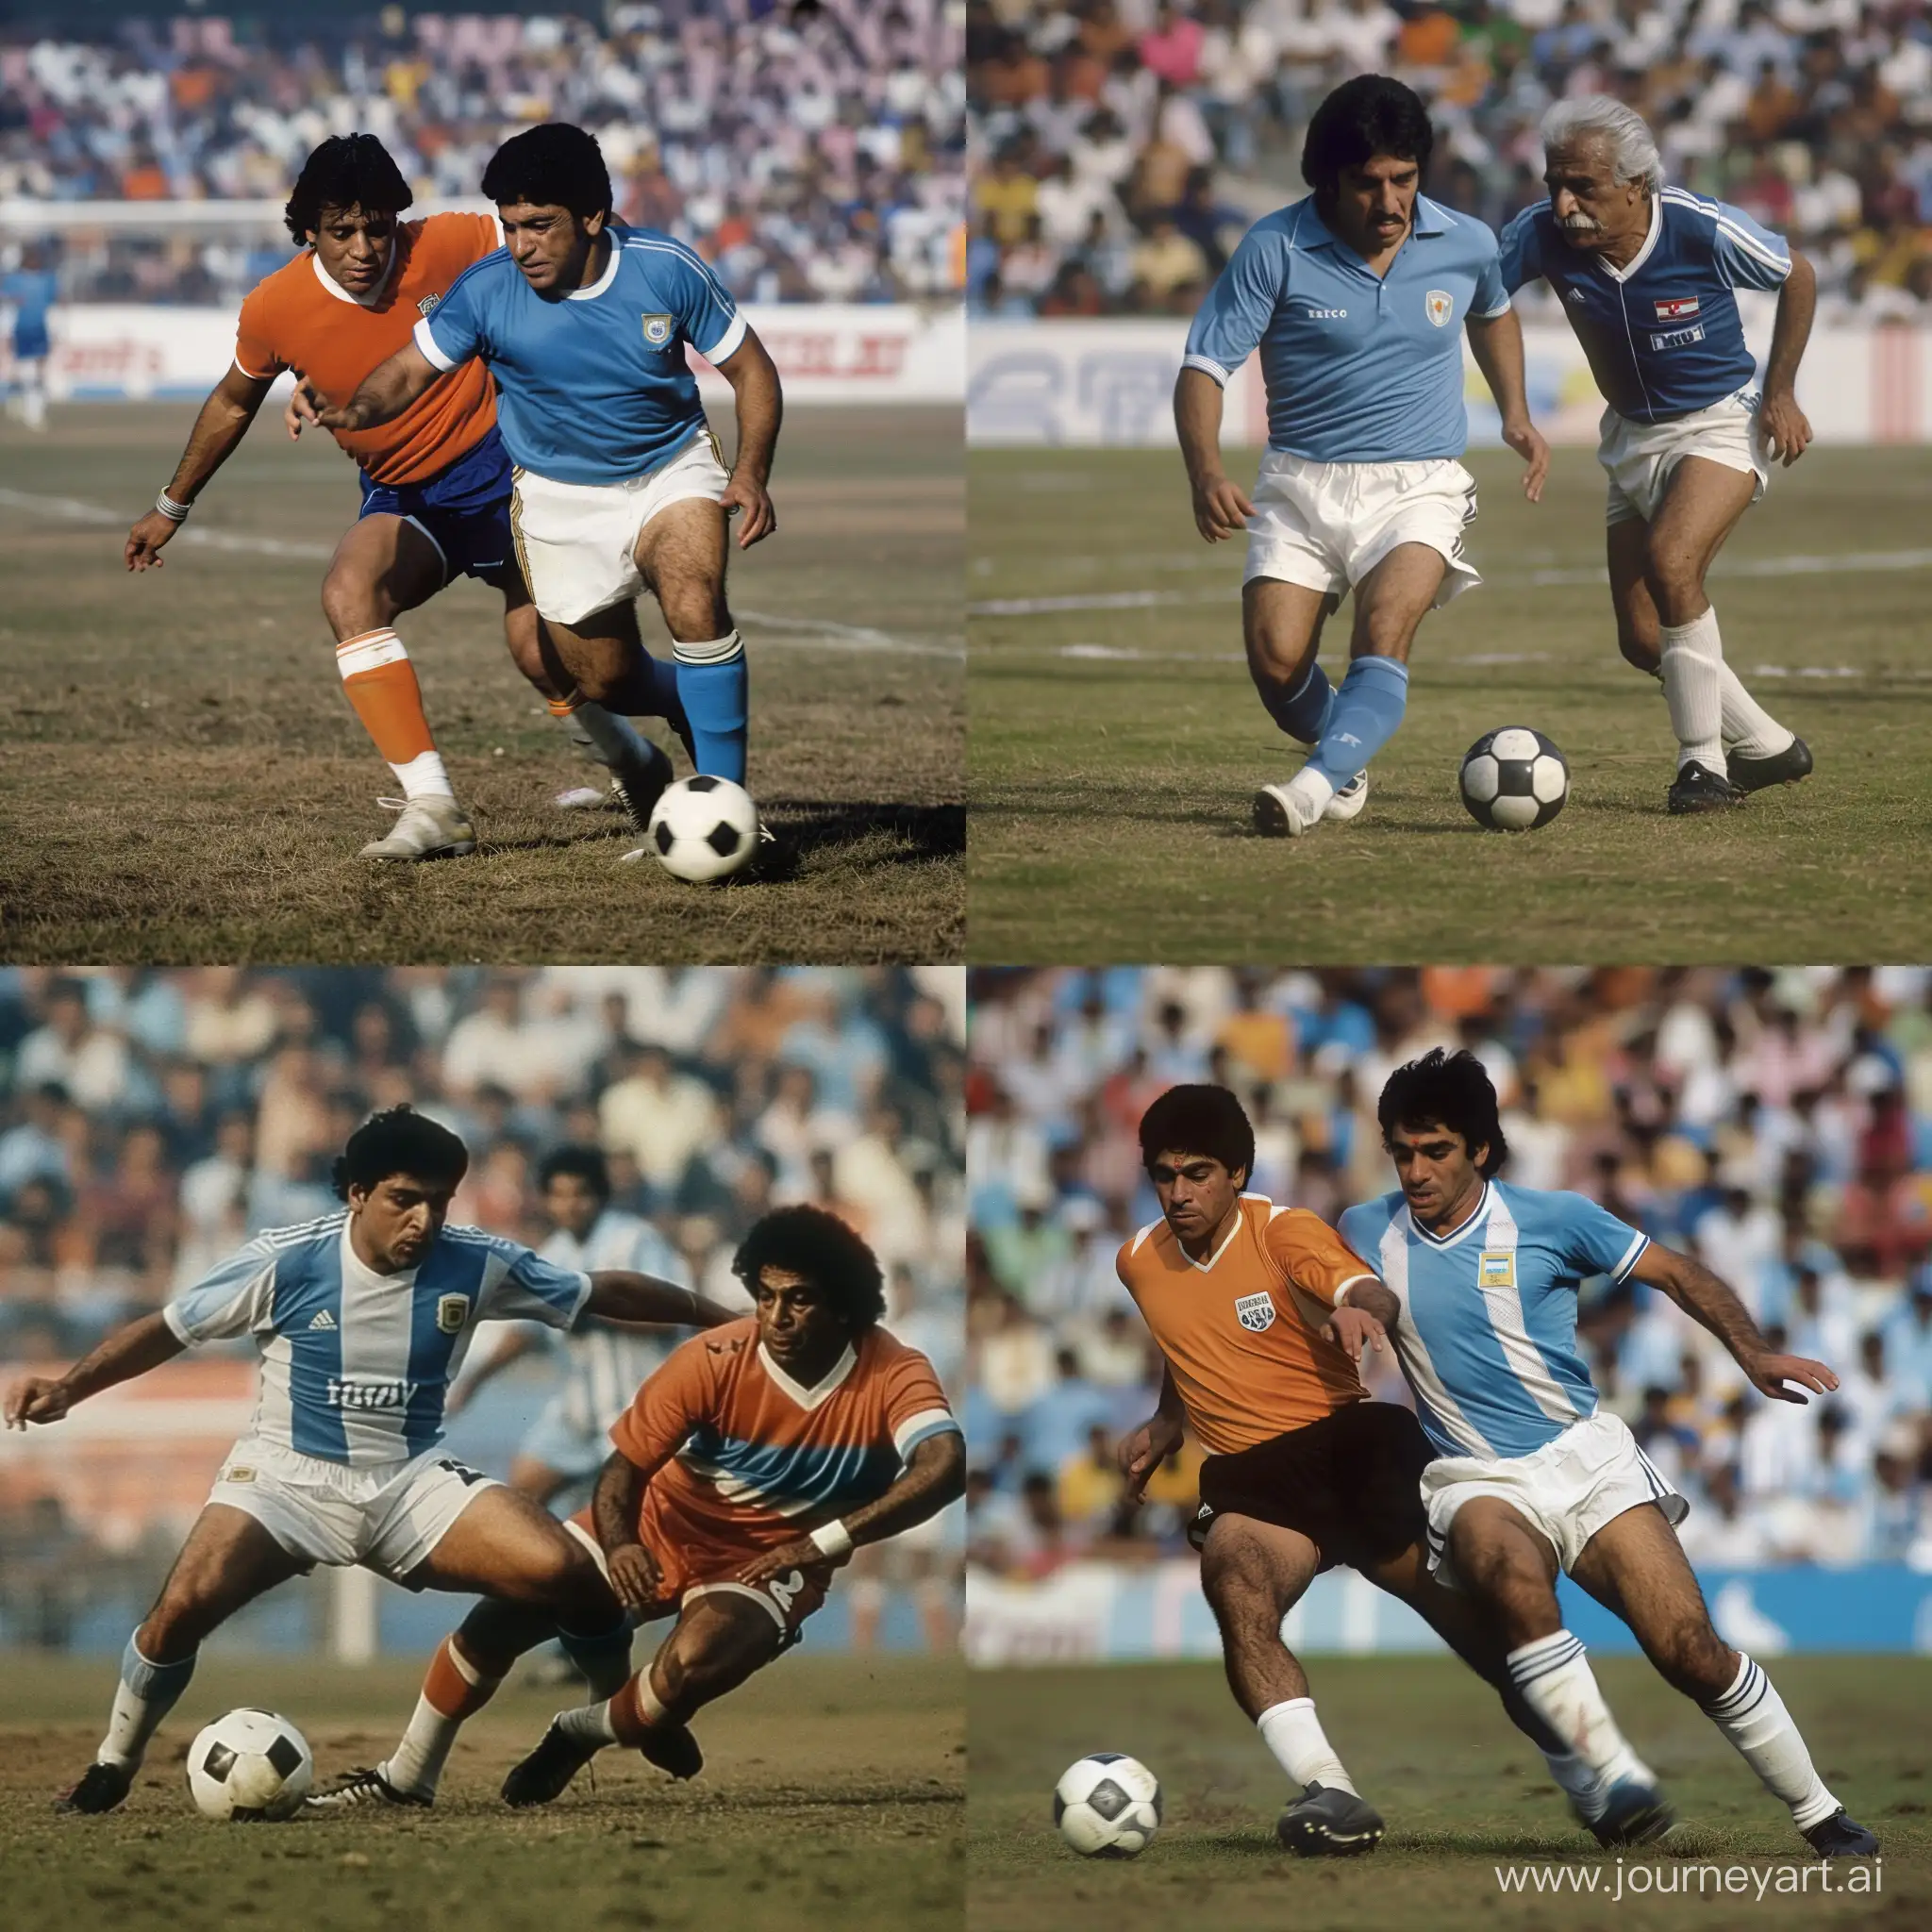 Diago Maradona is playing football with pele in india